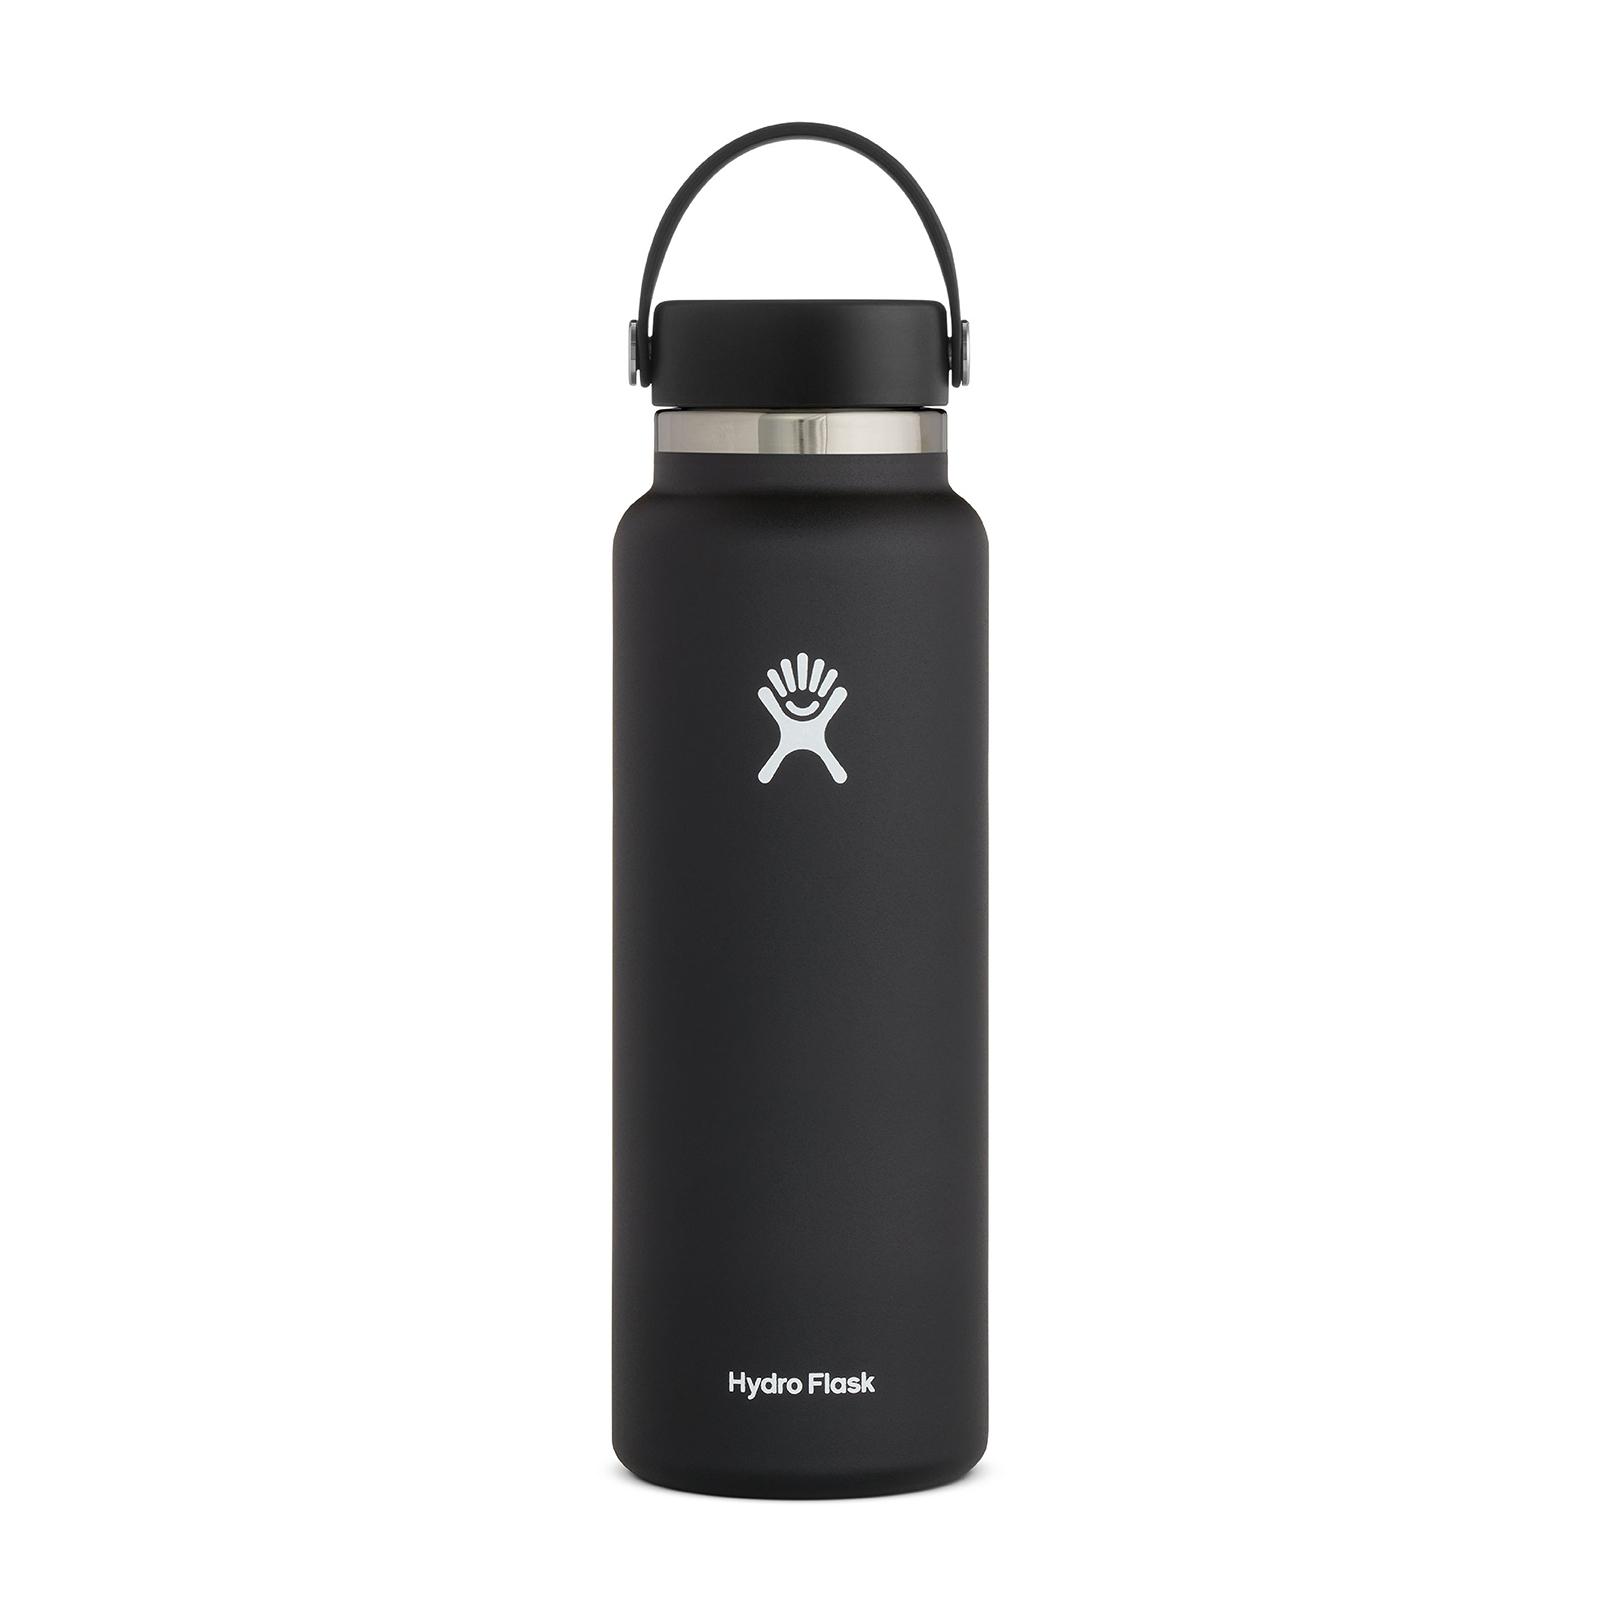 Hydro Flask 40oz Wide Mouth Black image01